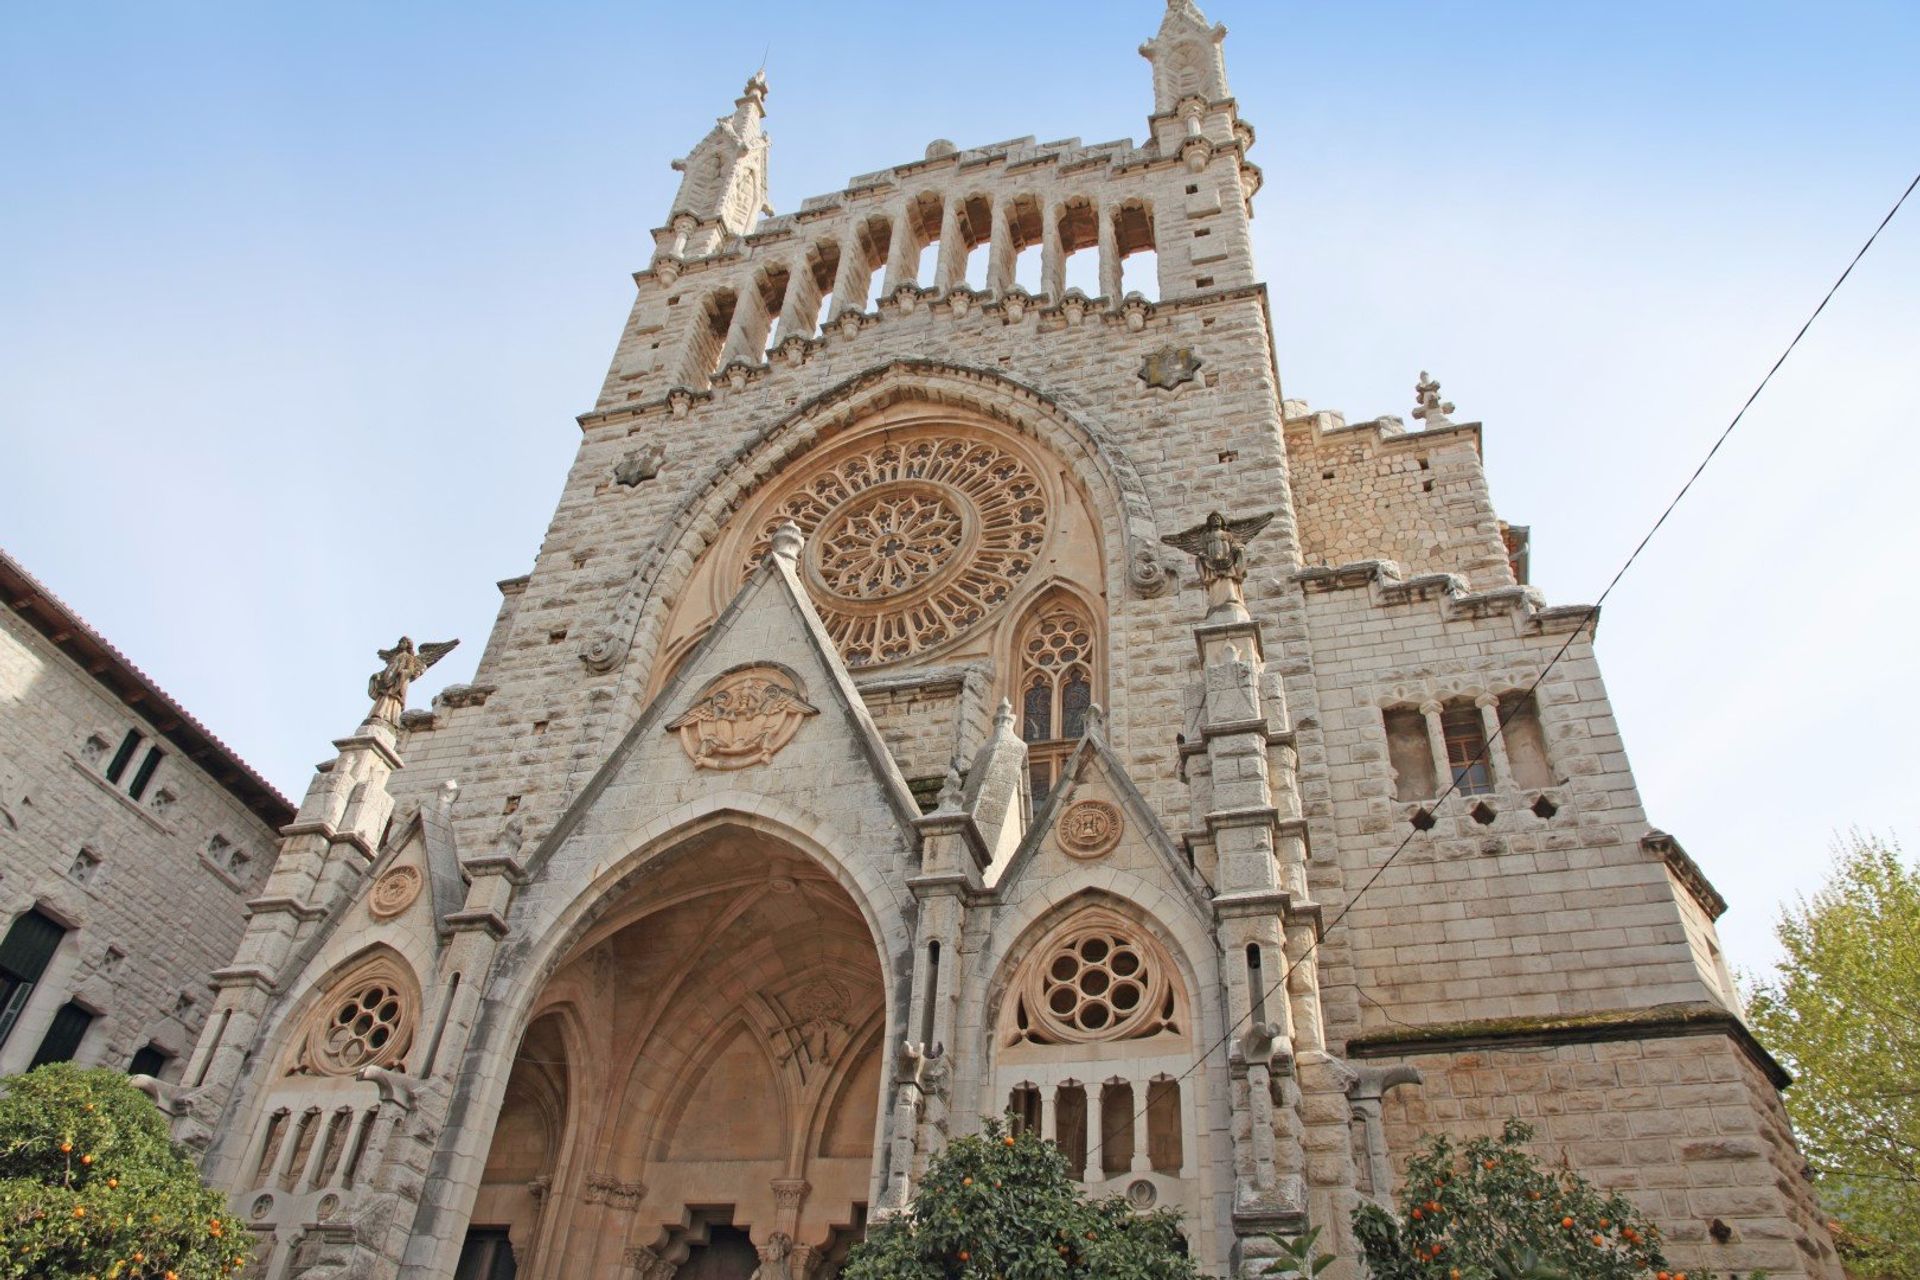 Gothic and baroque architecture on the Església de Sant Bartomeu church in the centre of Sóller